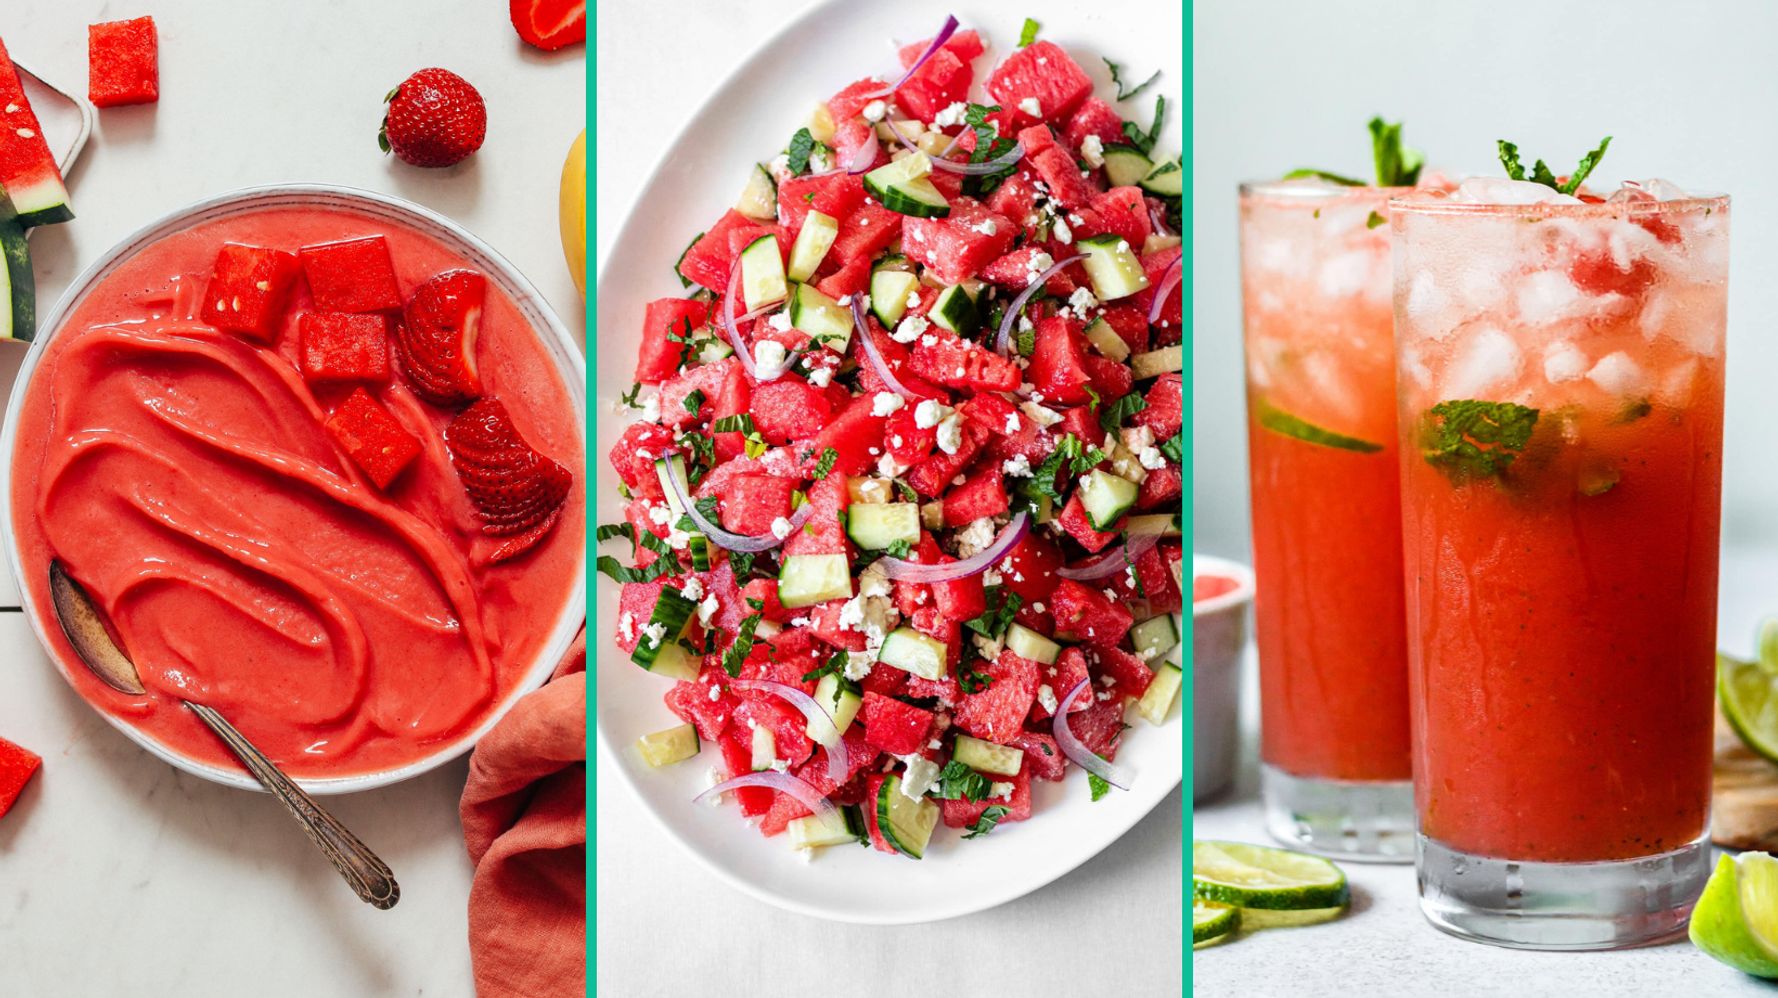 What To Do With Watermelon: Salads, Drinks, Desserts And More